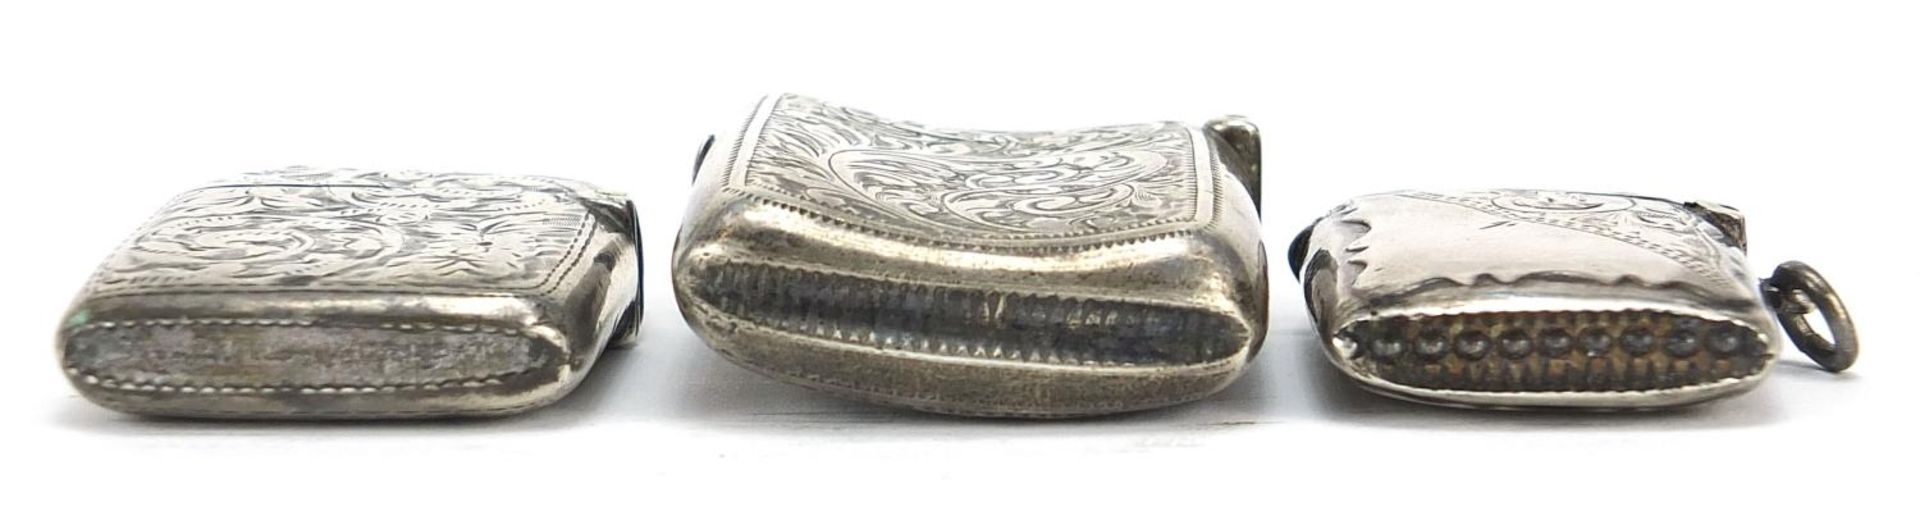 Three Victorian and later silver vestas with engraved decoration, Chester 1899, Birmingham 1898 - Image 9 of 14